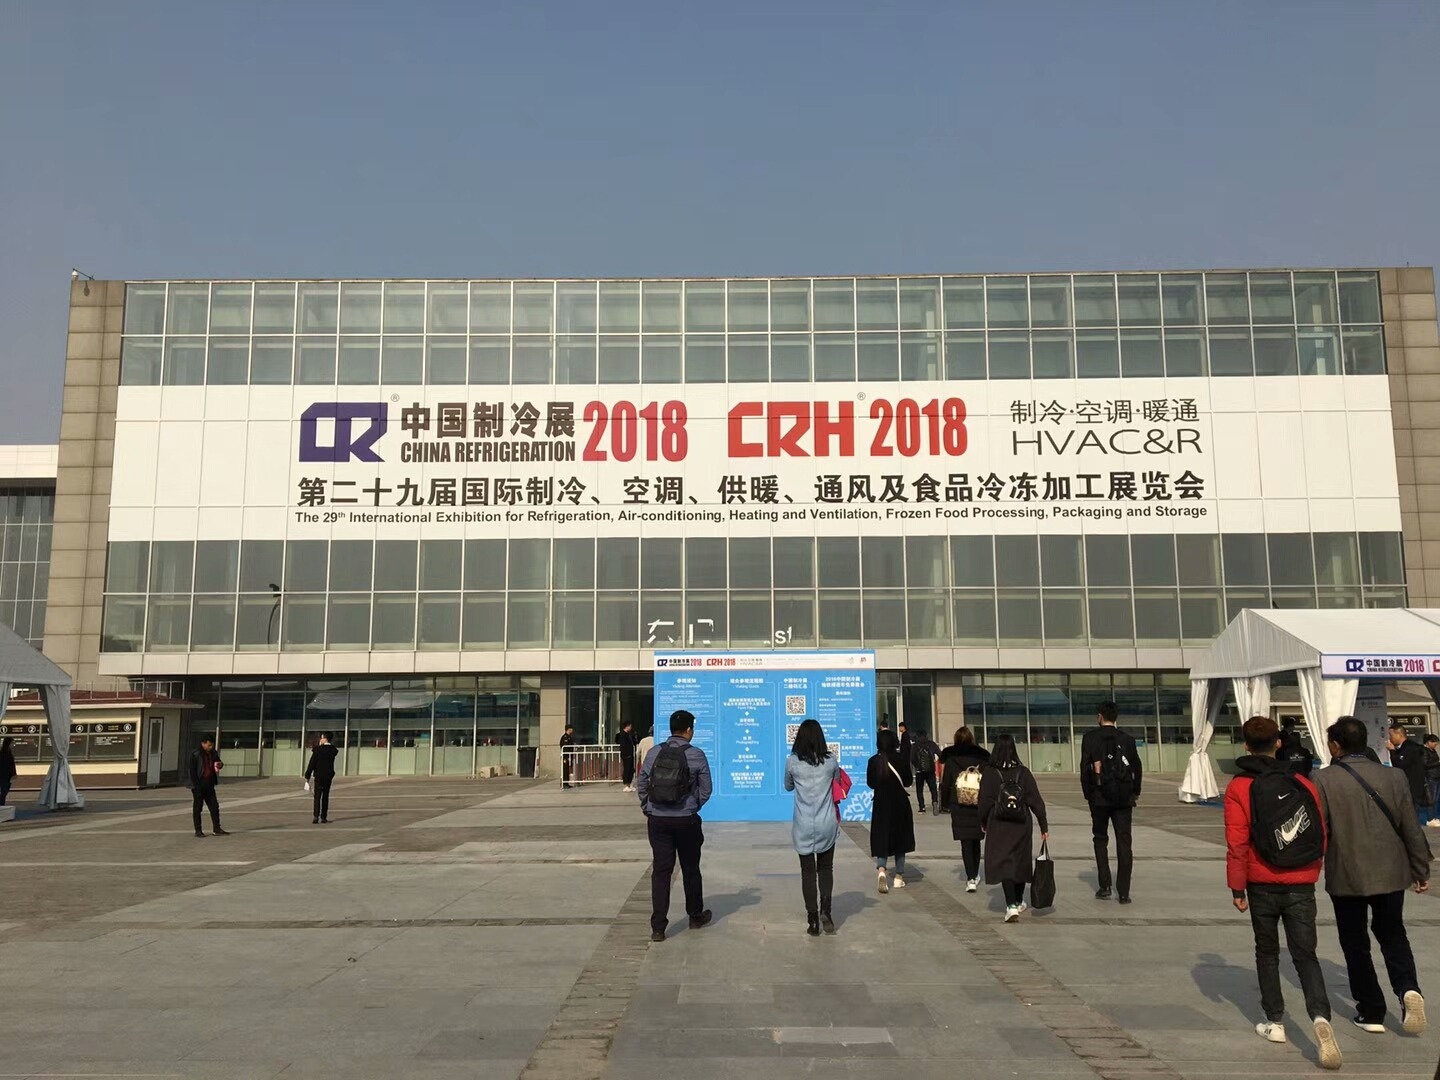 Ever Power successfully participated in Beijing 2018 China Refrigeration Exhibition